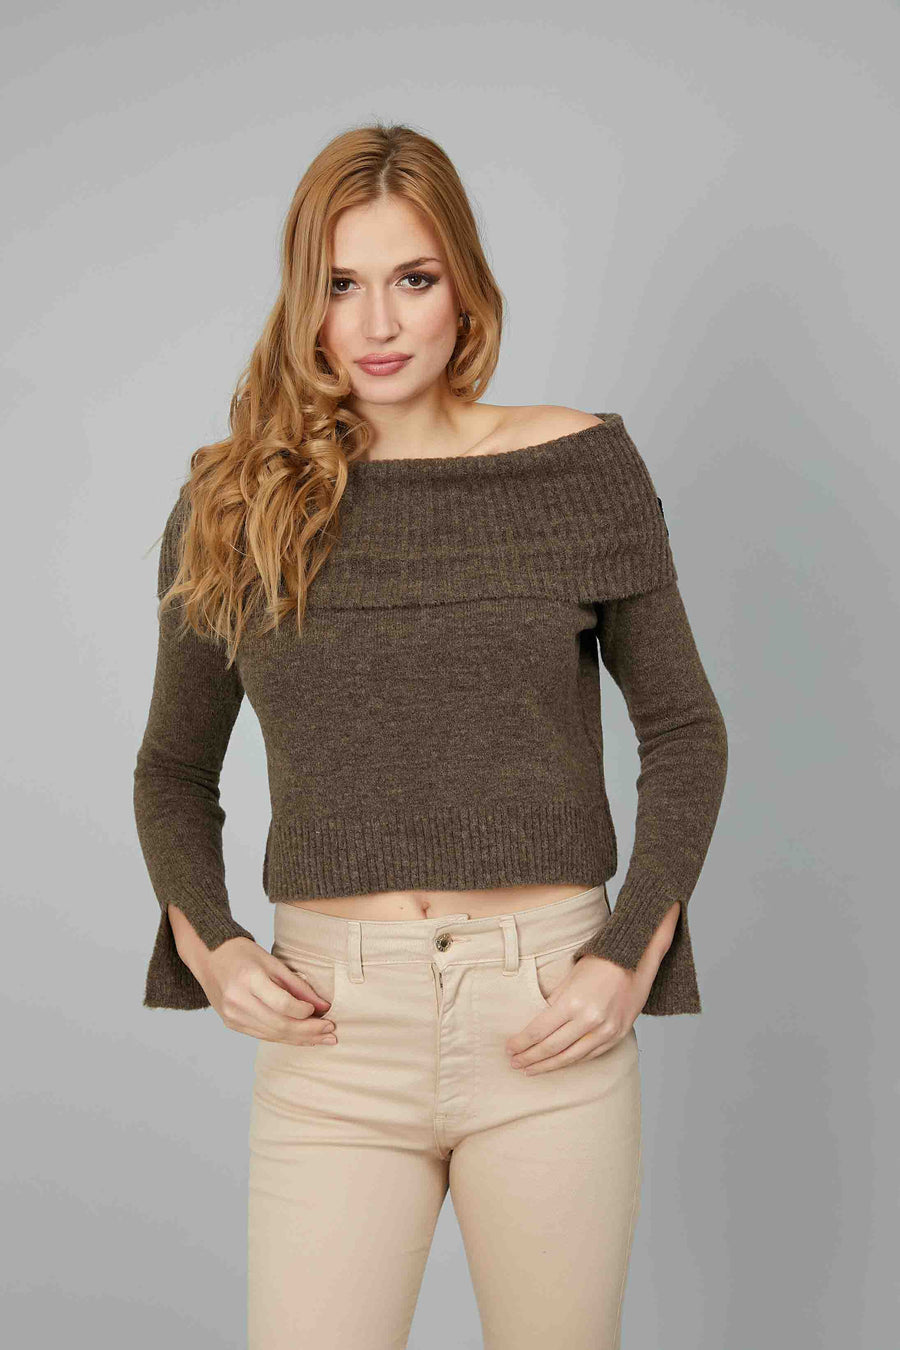 BROWN BOAT NECK SWEATER